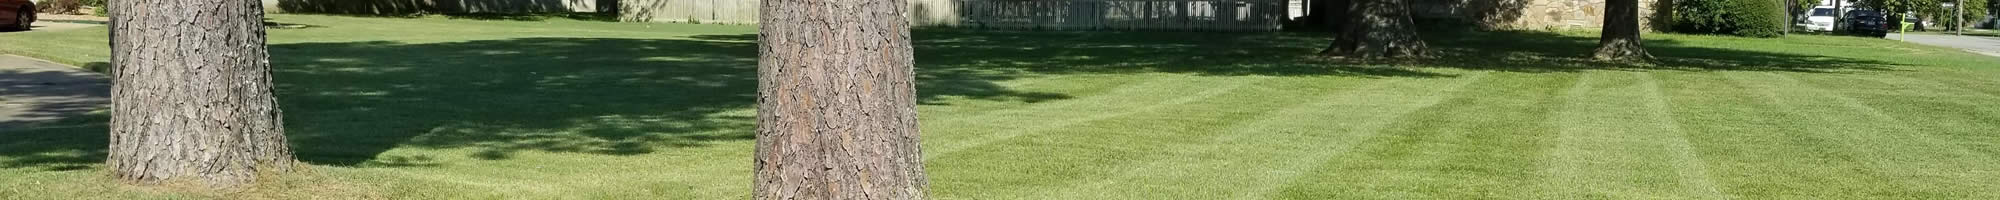 Lawn Care Landscaping Services Paragould